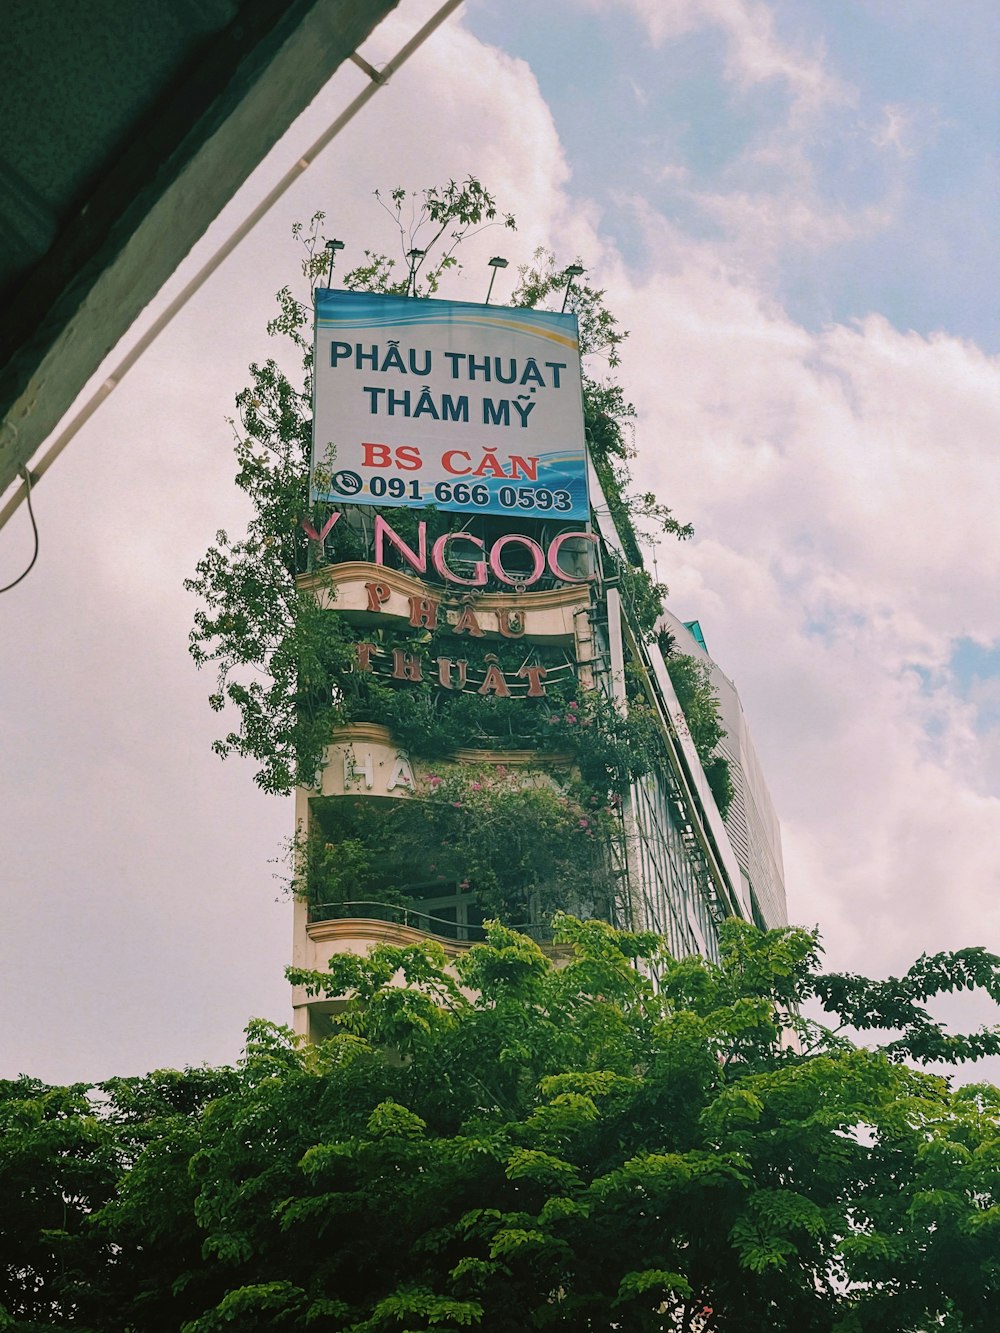 a tall tower with a sign on it